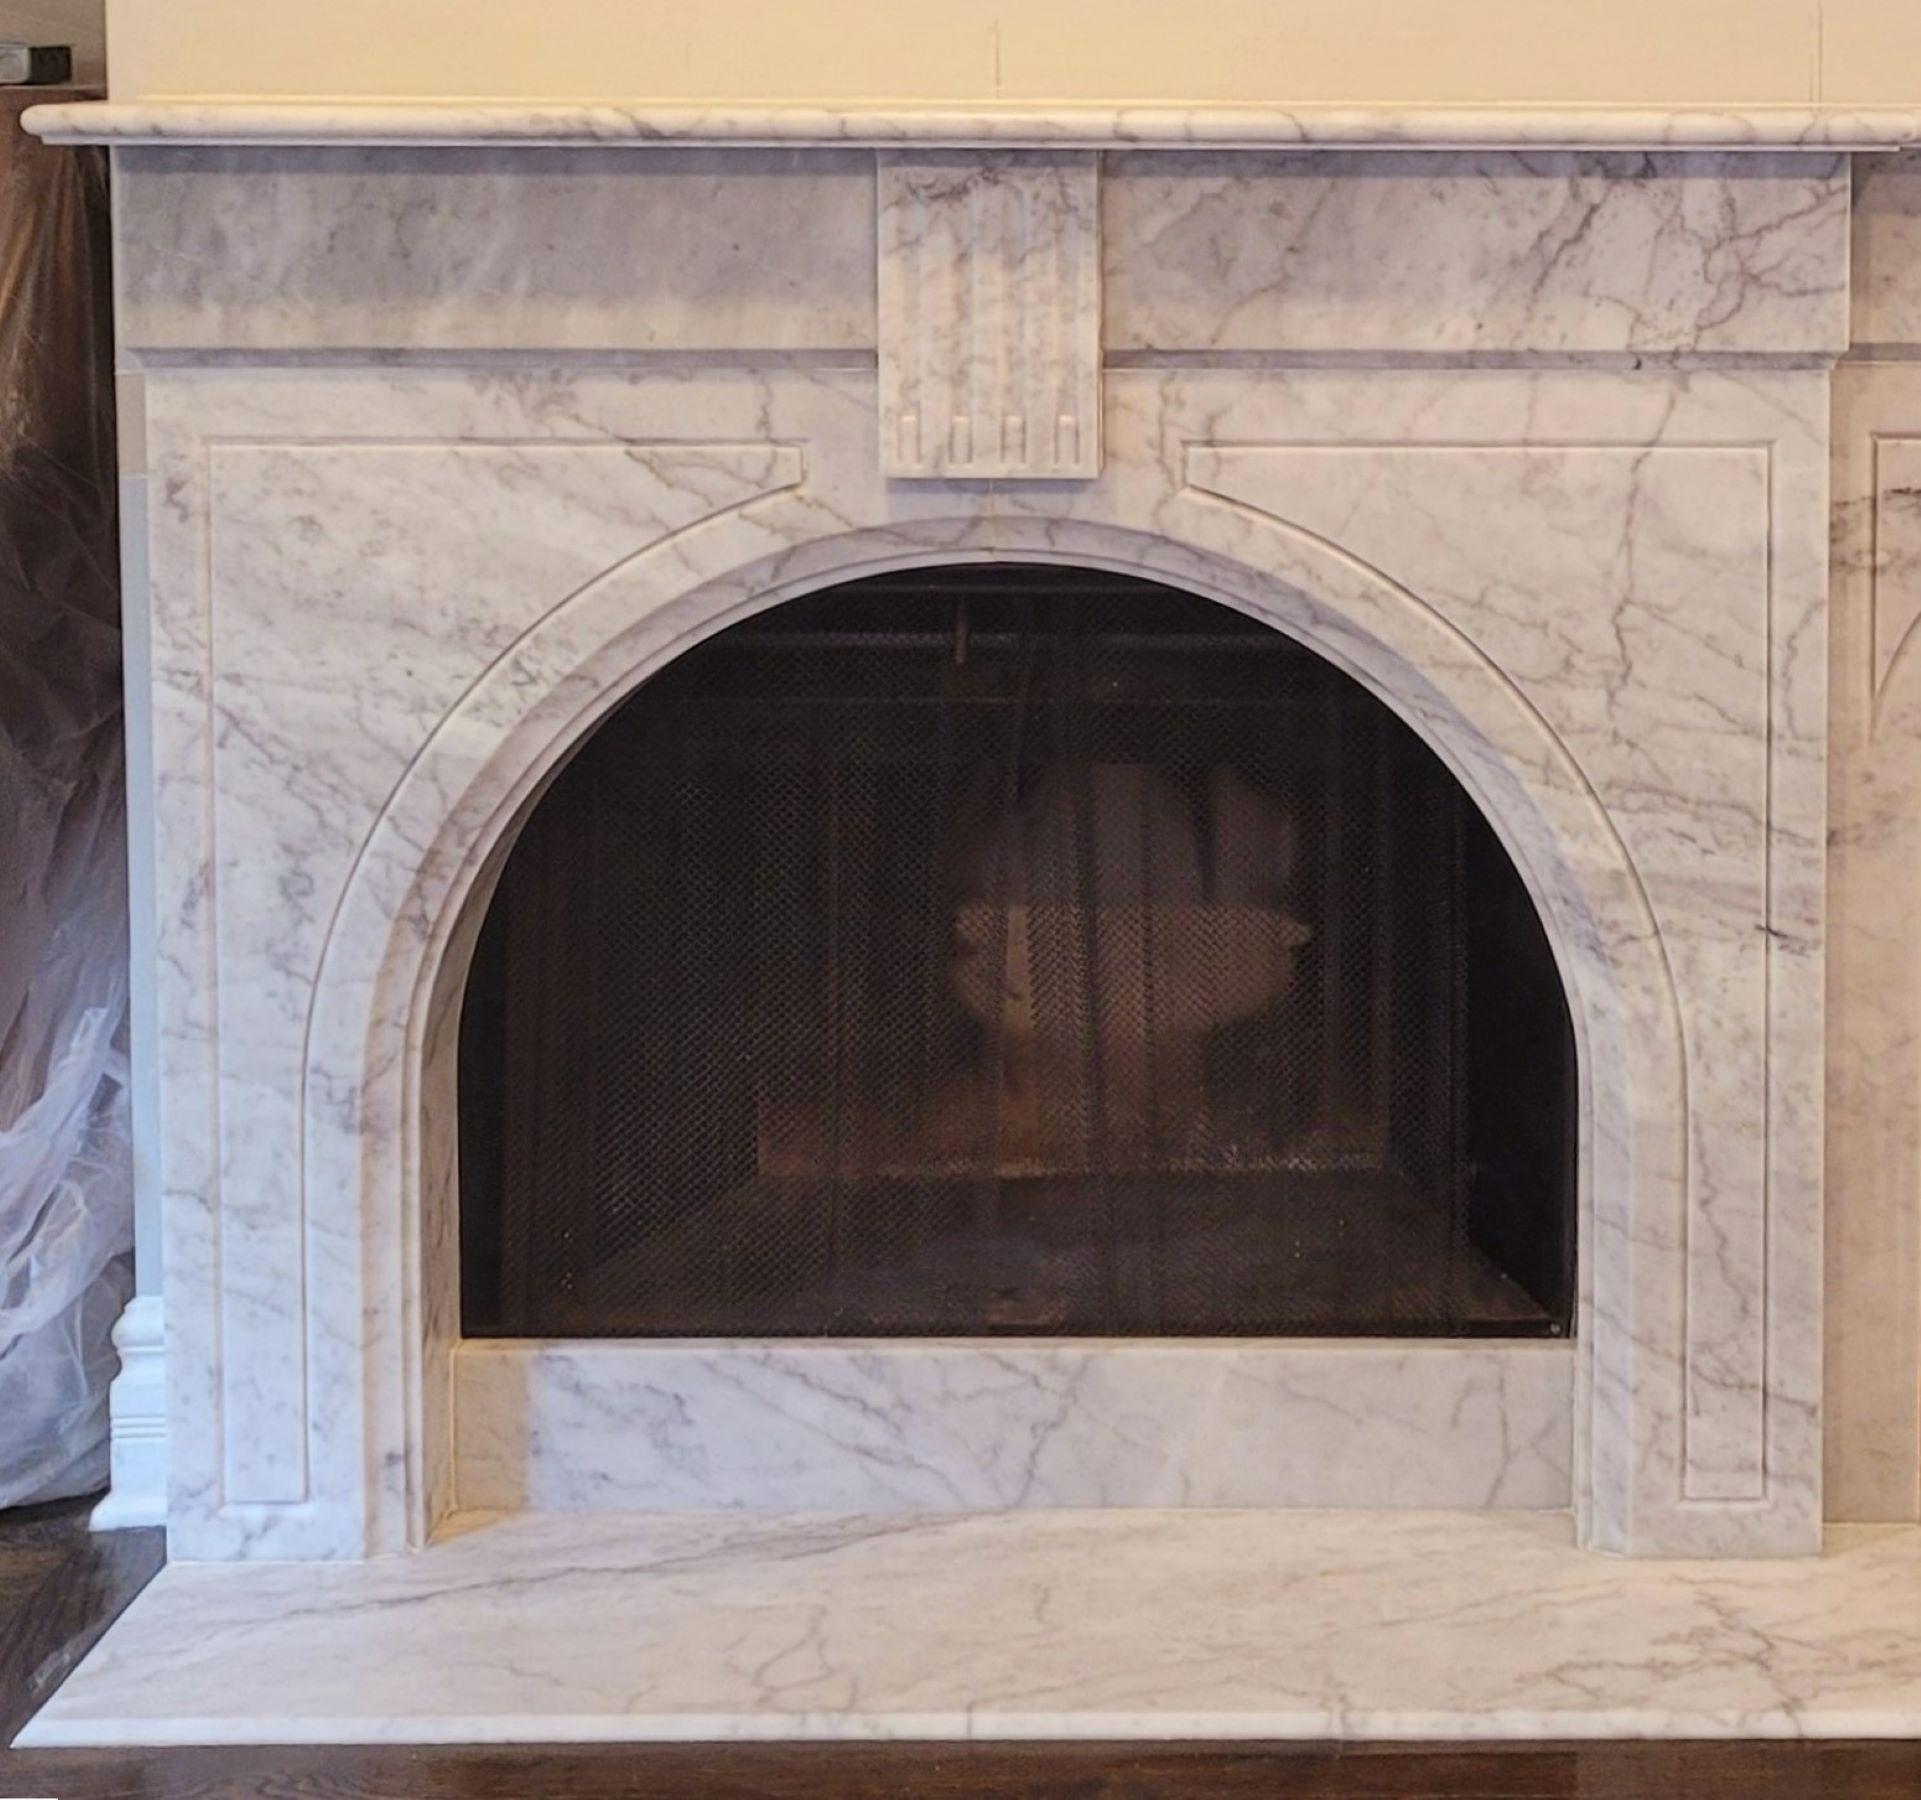 The Josephine stone fireplace, with its wide, fully-arched opening, evokes the 19th century English Victorian era.  Its thin, elegantly-edged shelf piece is followed by a flat section, stepping in to meet triangular panels bordered by an engraved